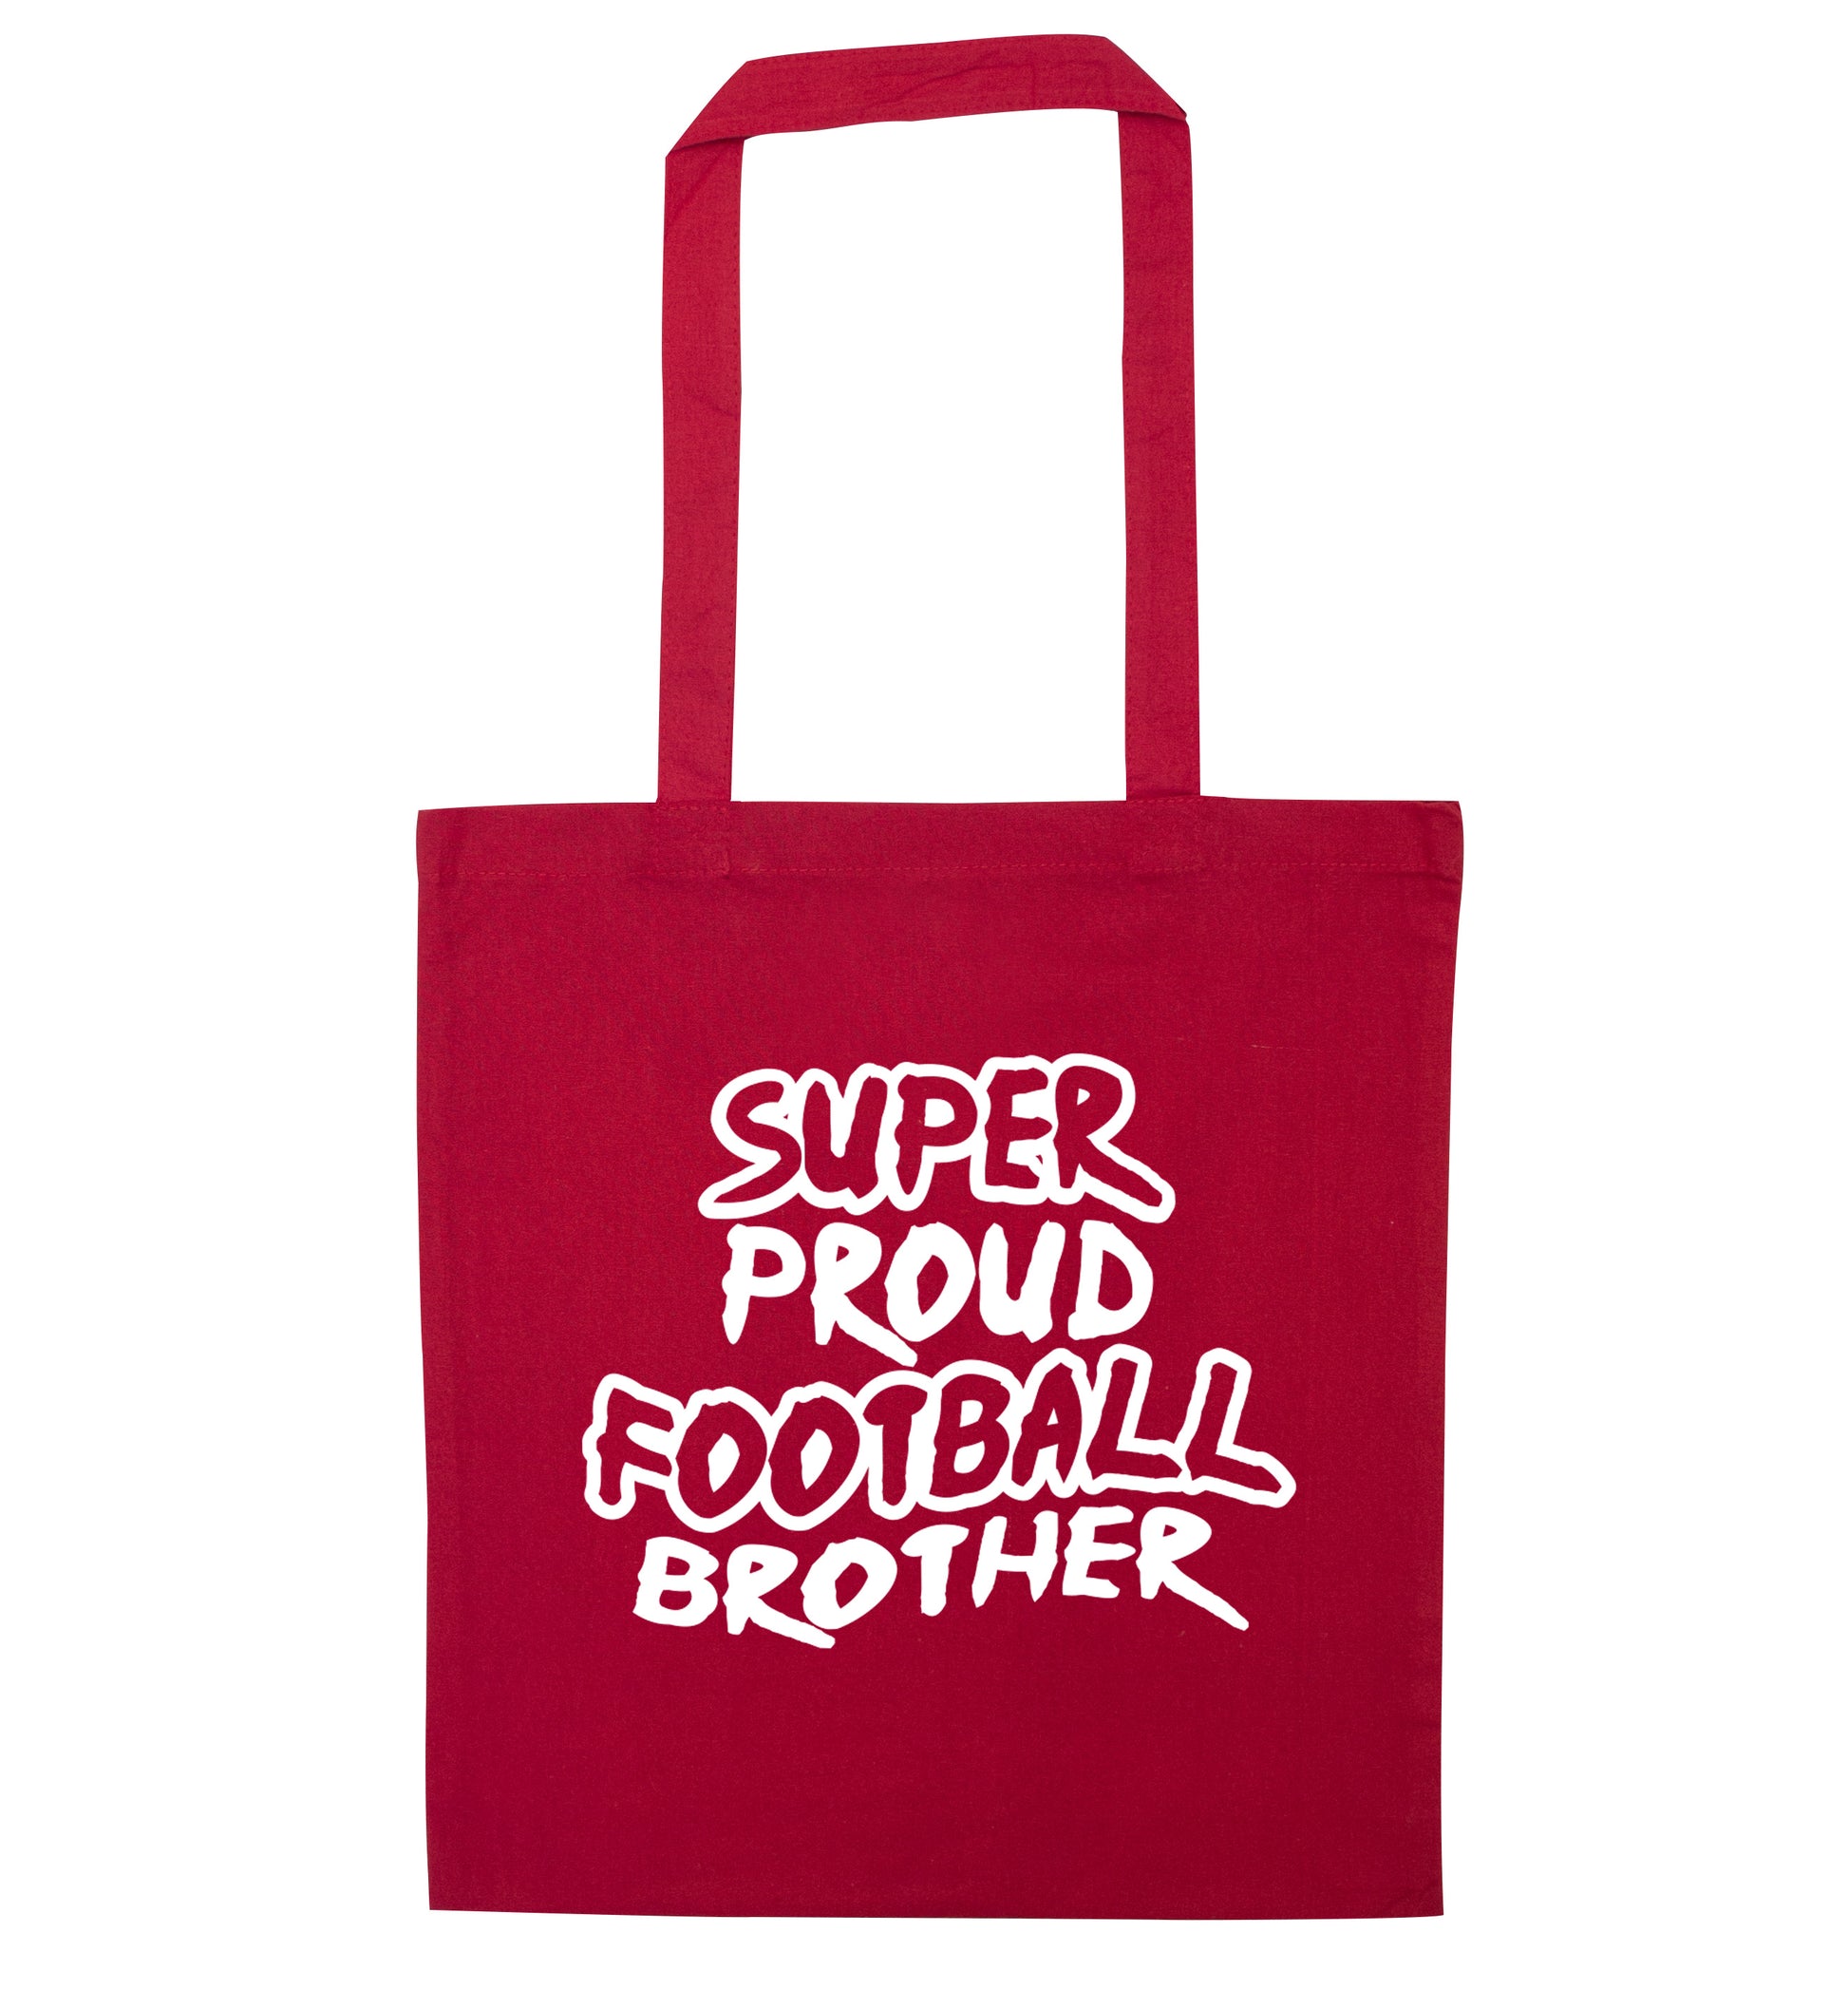 Super proud football brother red tote bag